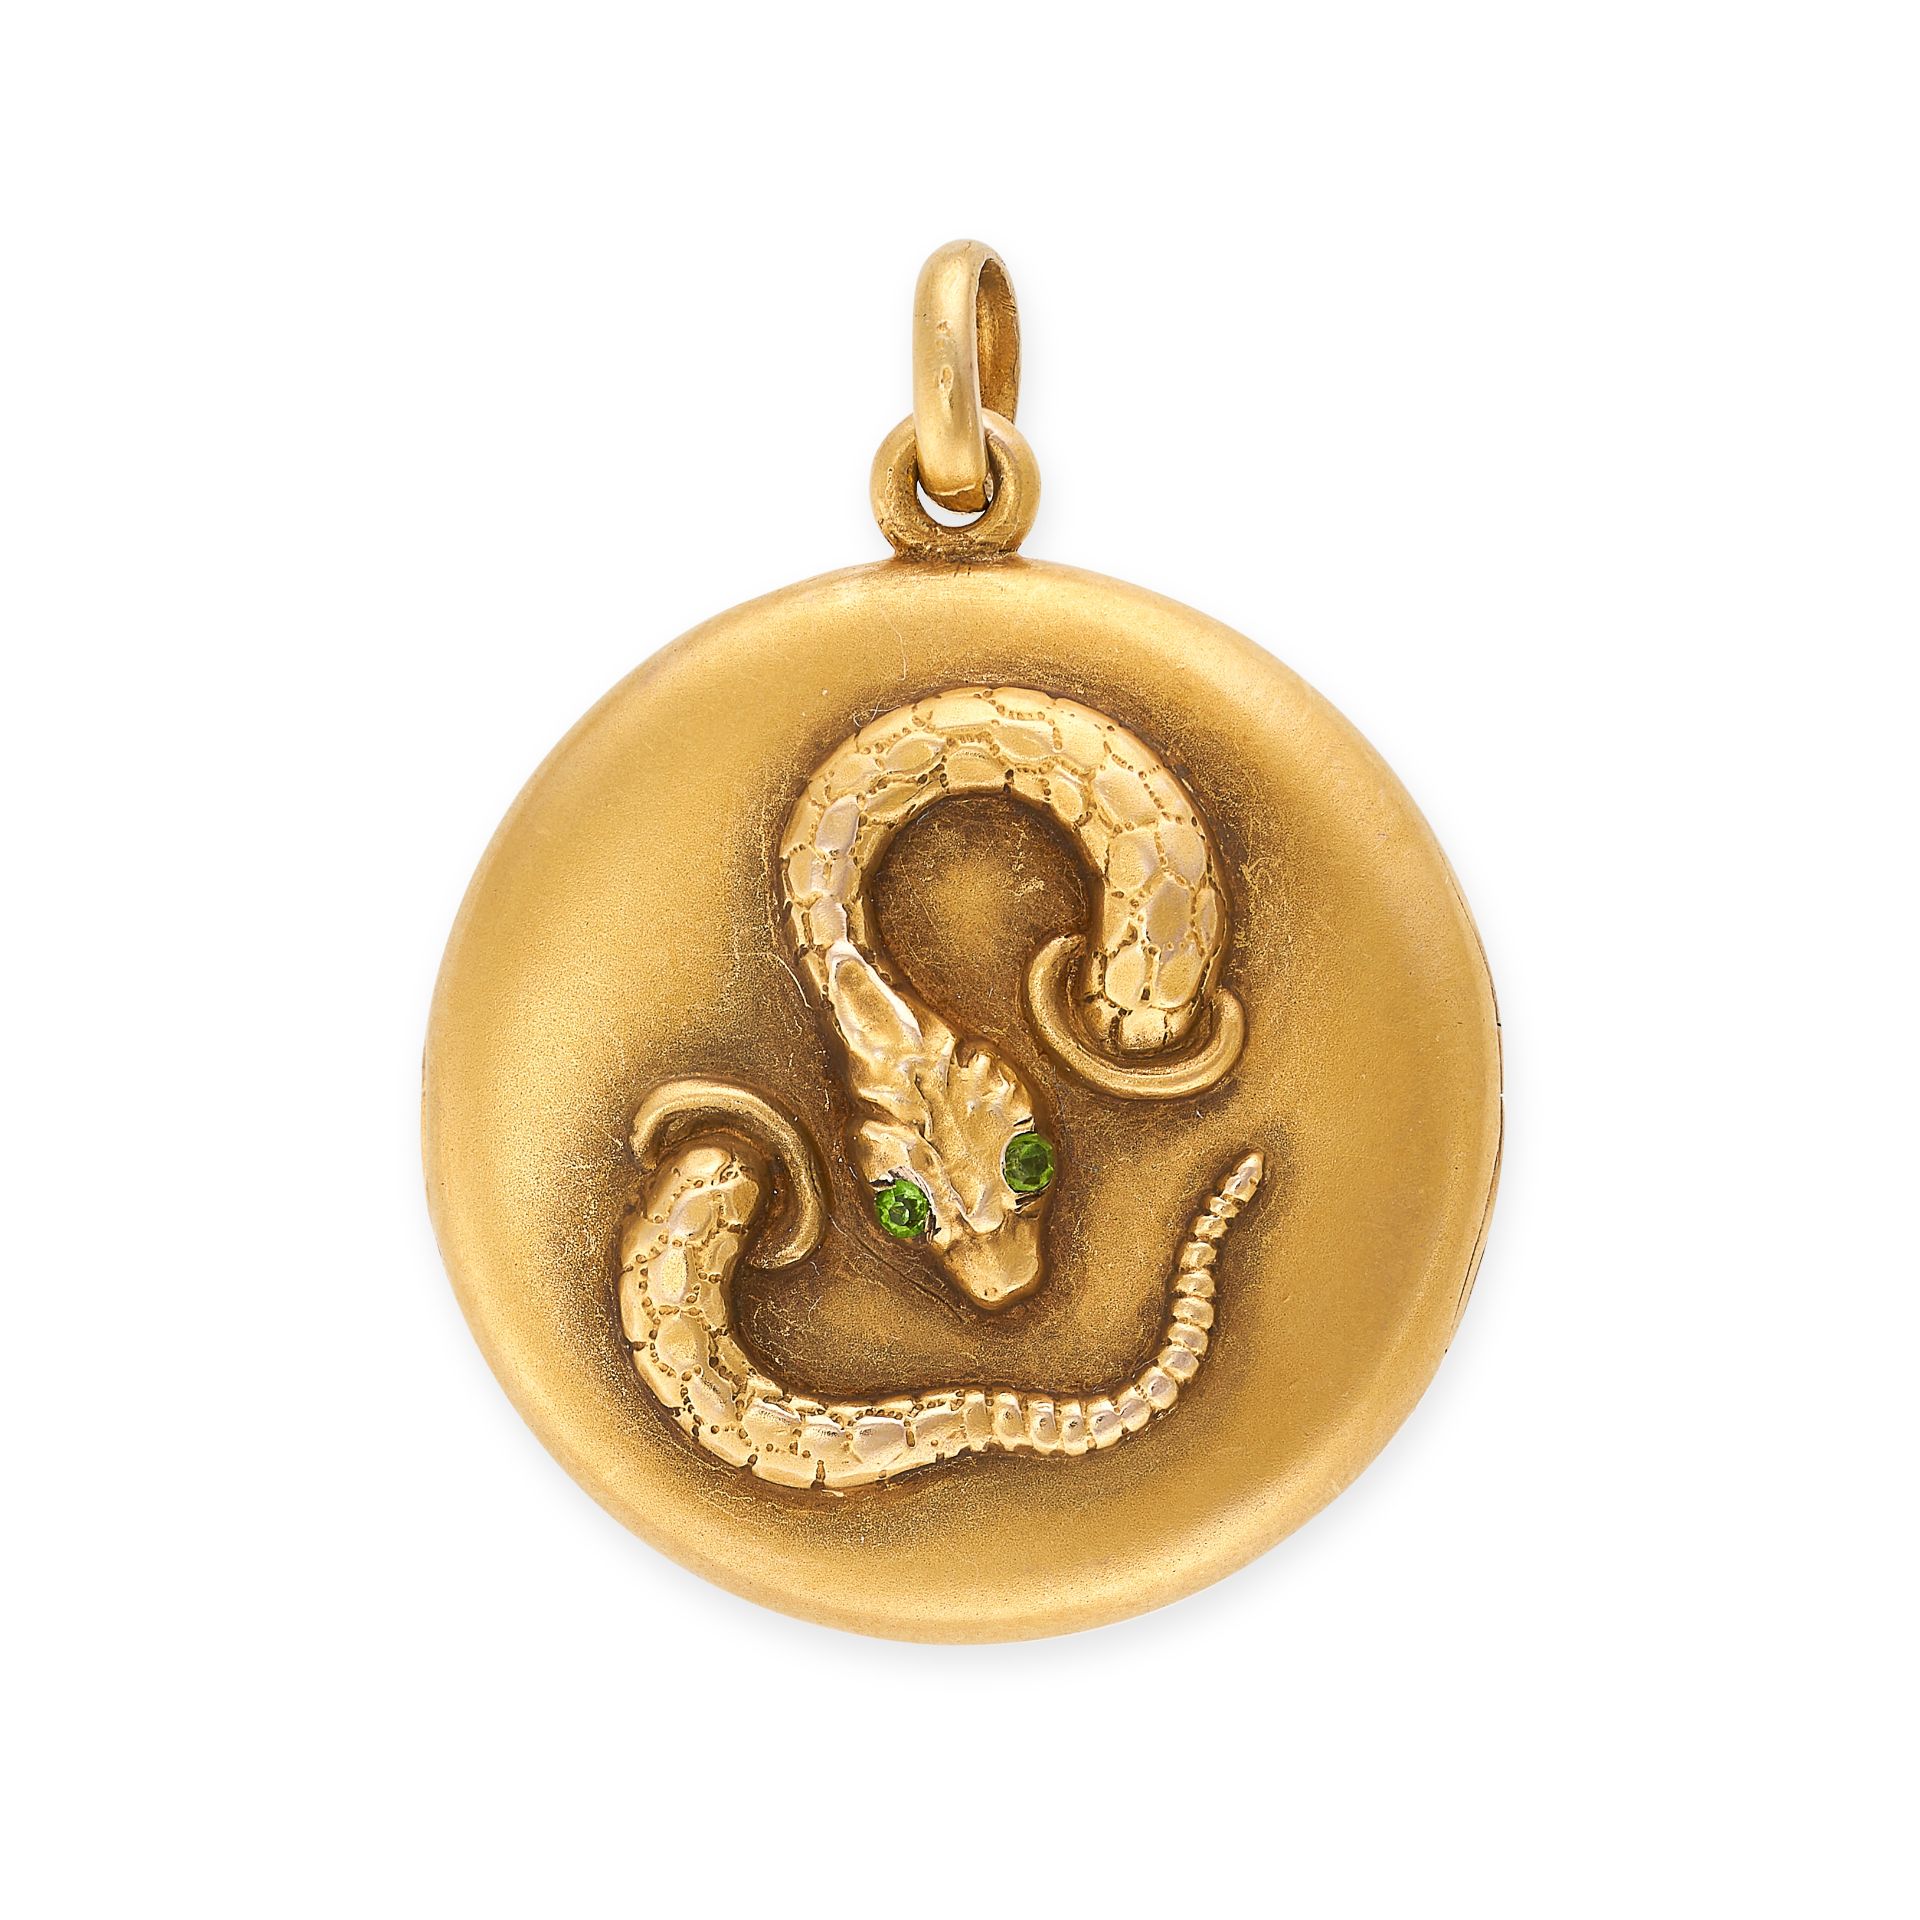 NO RESERVE - AN ANTIQUE SNAKE LOCKET / PENDANT in 10ct yellow gold, the circular hinged locket wi...